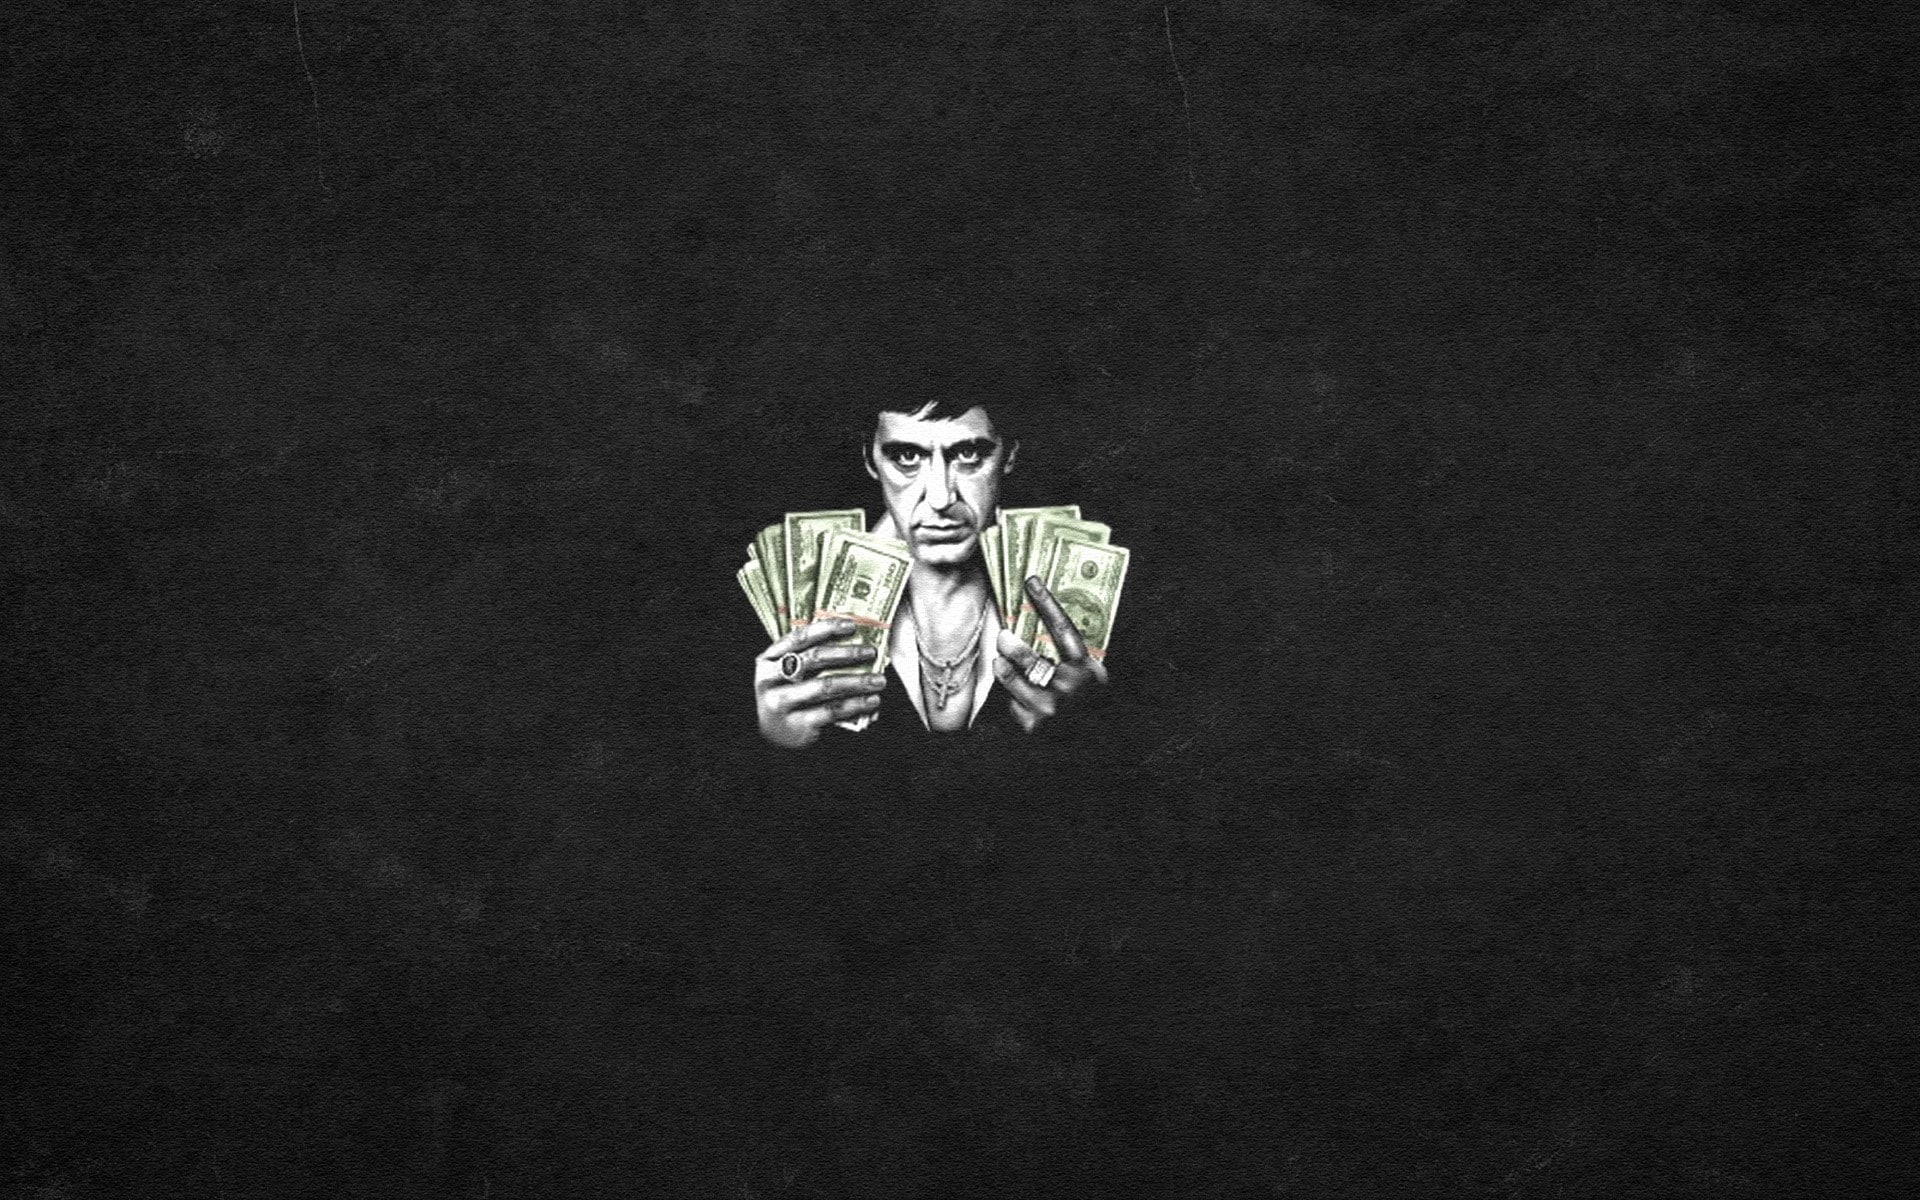 Scarface, Al pacino, Drawing, copy space, indoors, black background